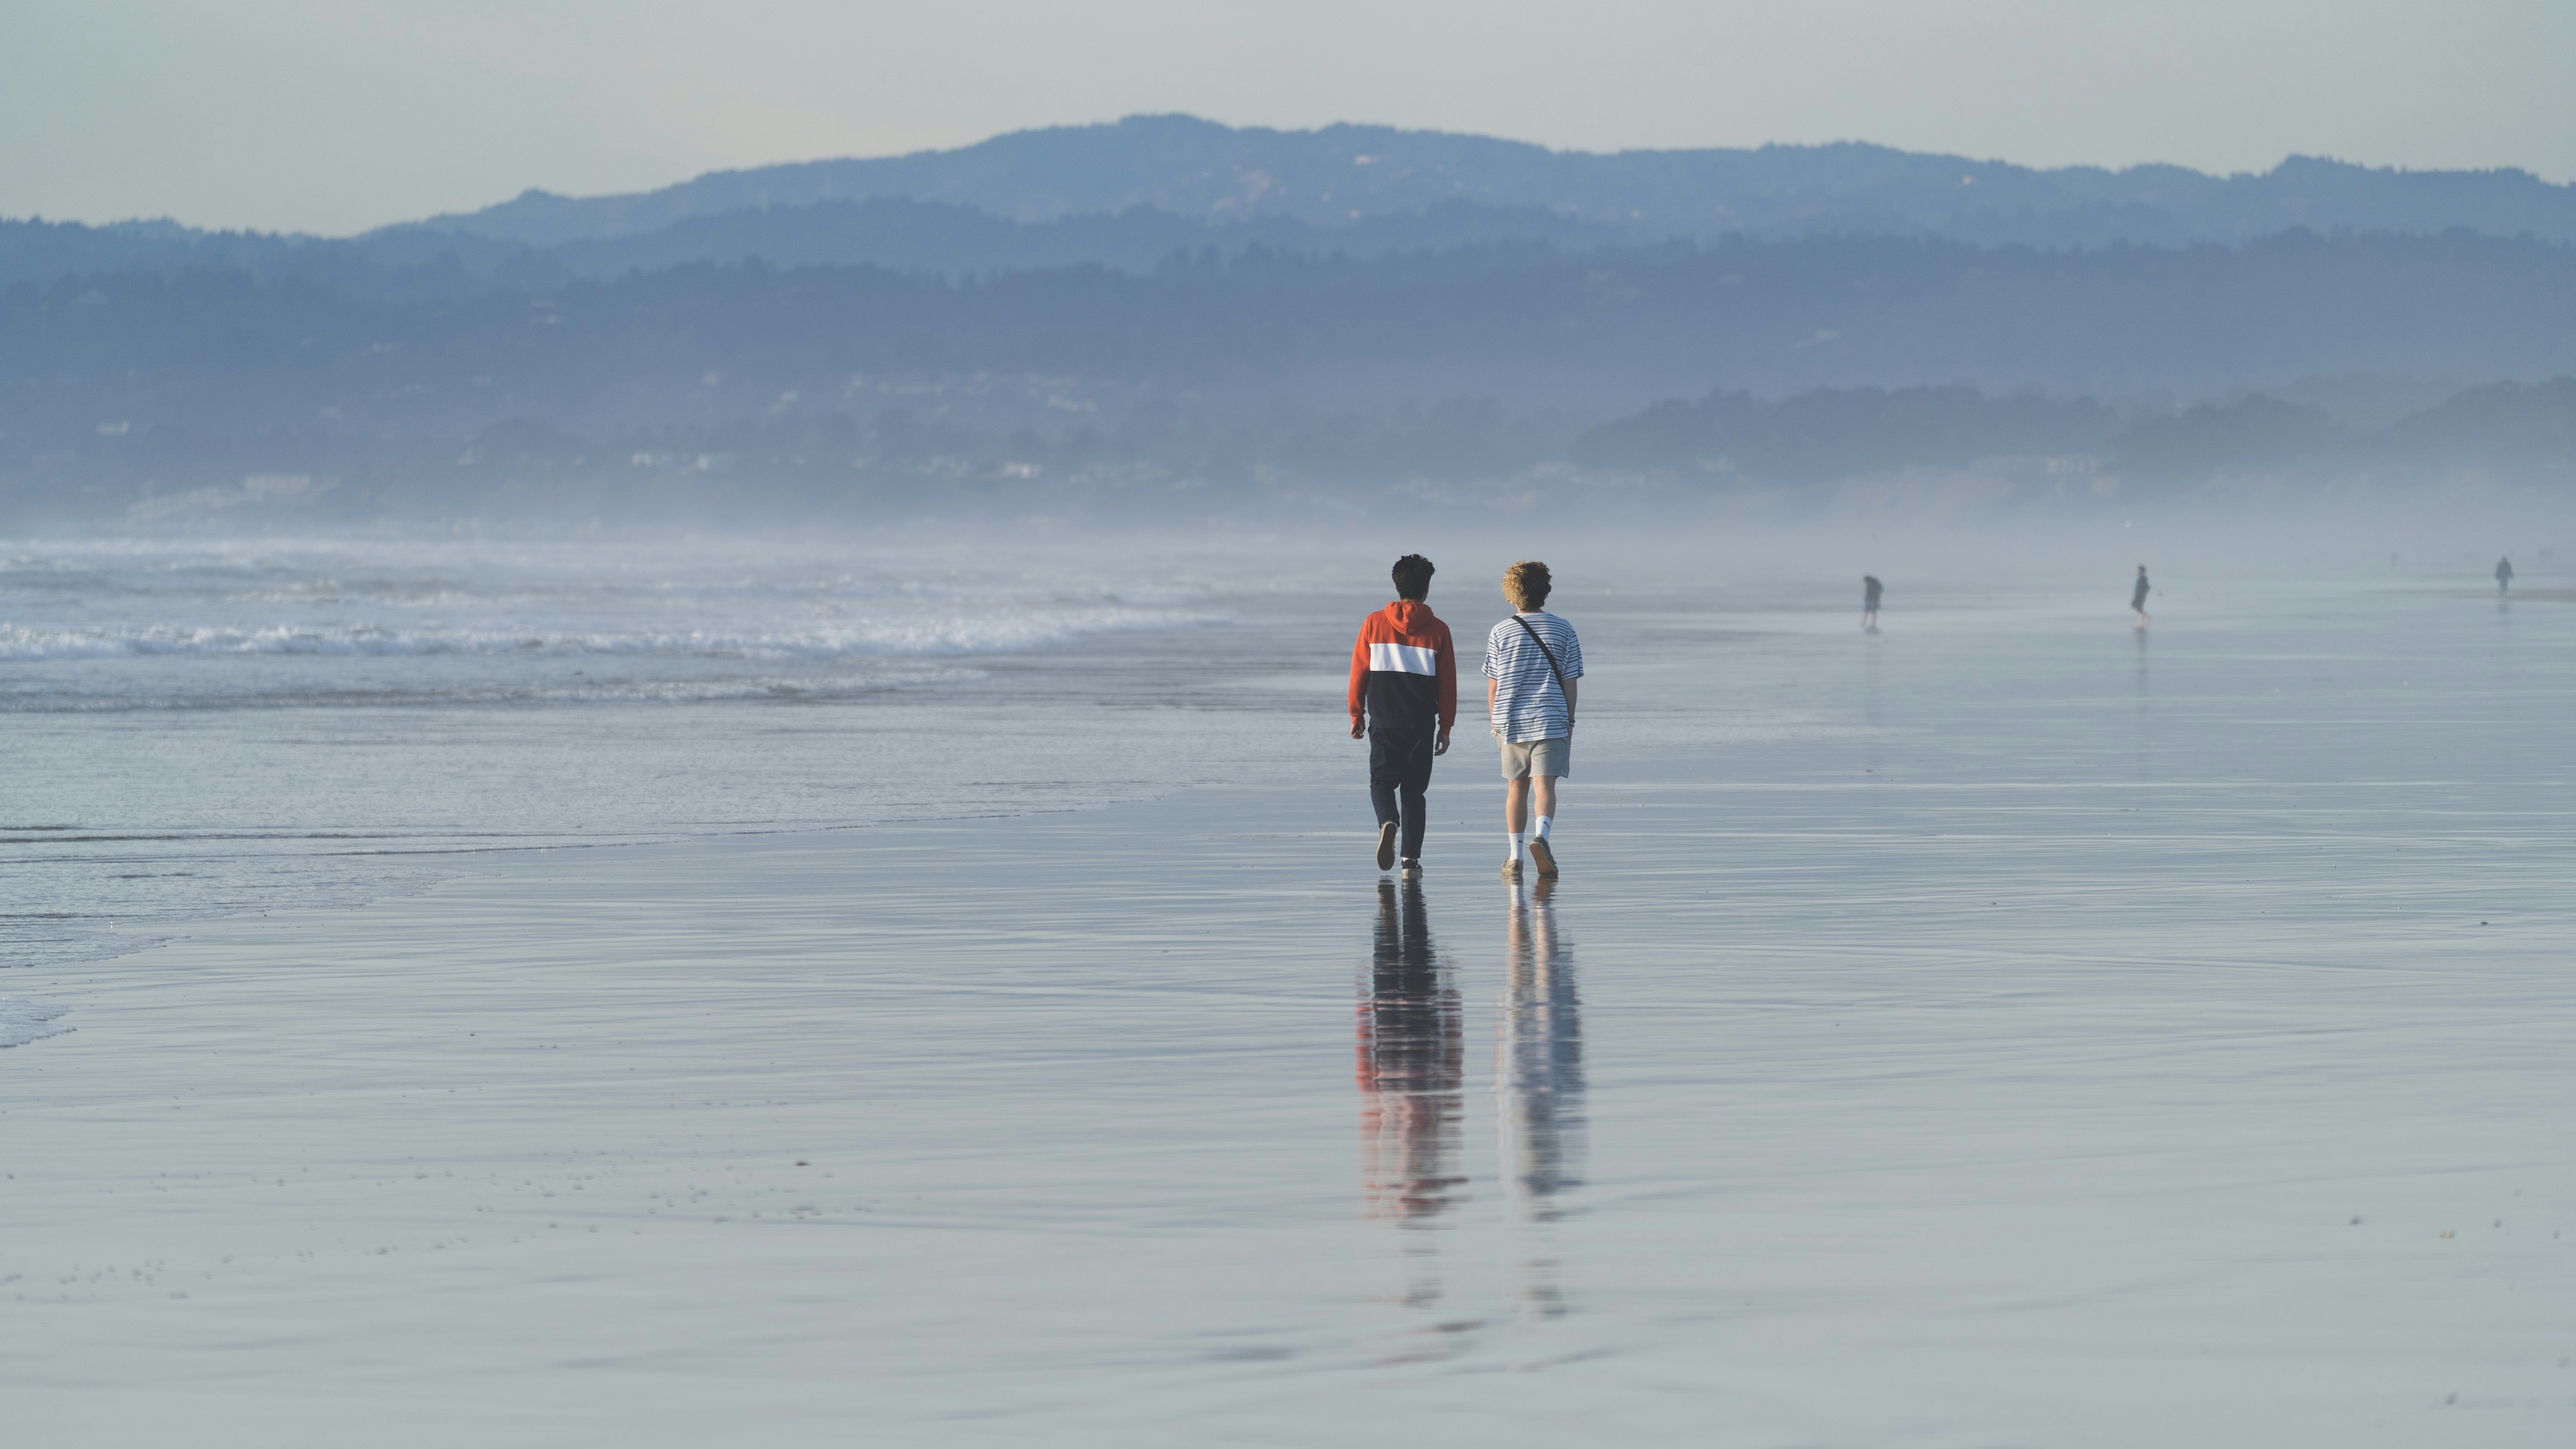 man and woman holding hands while walking on beach during daytime